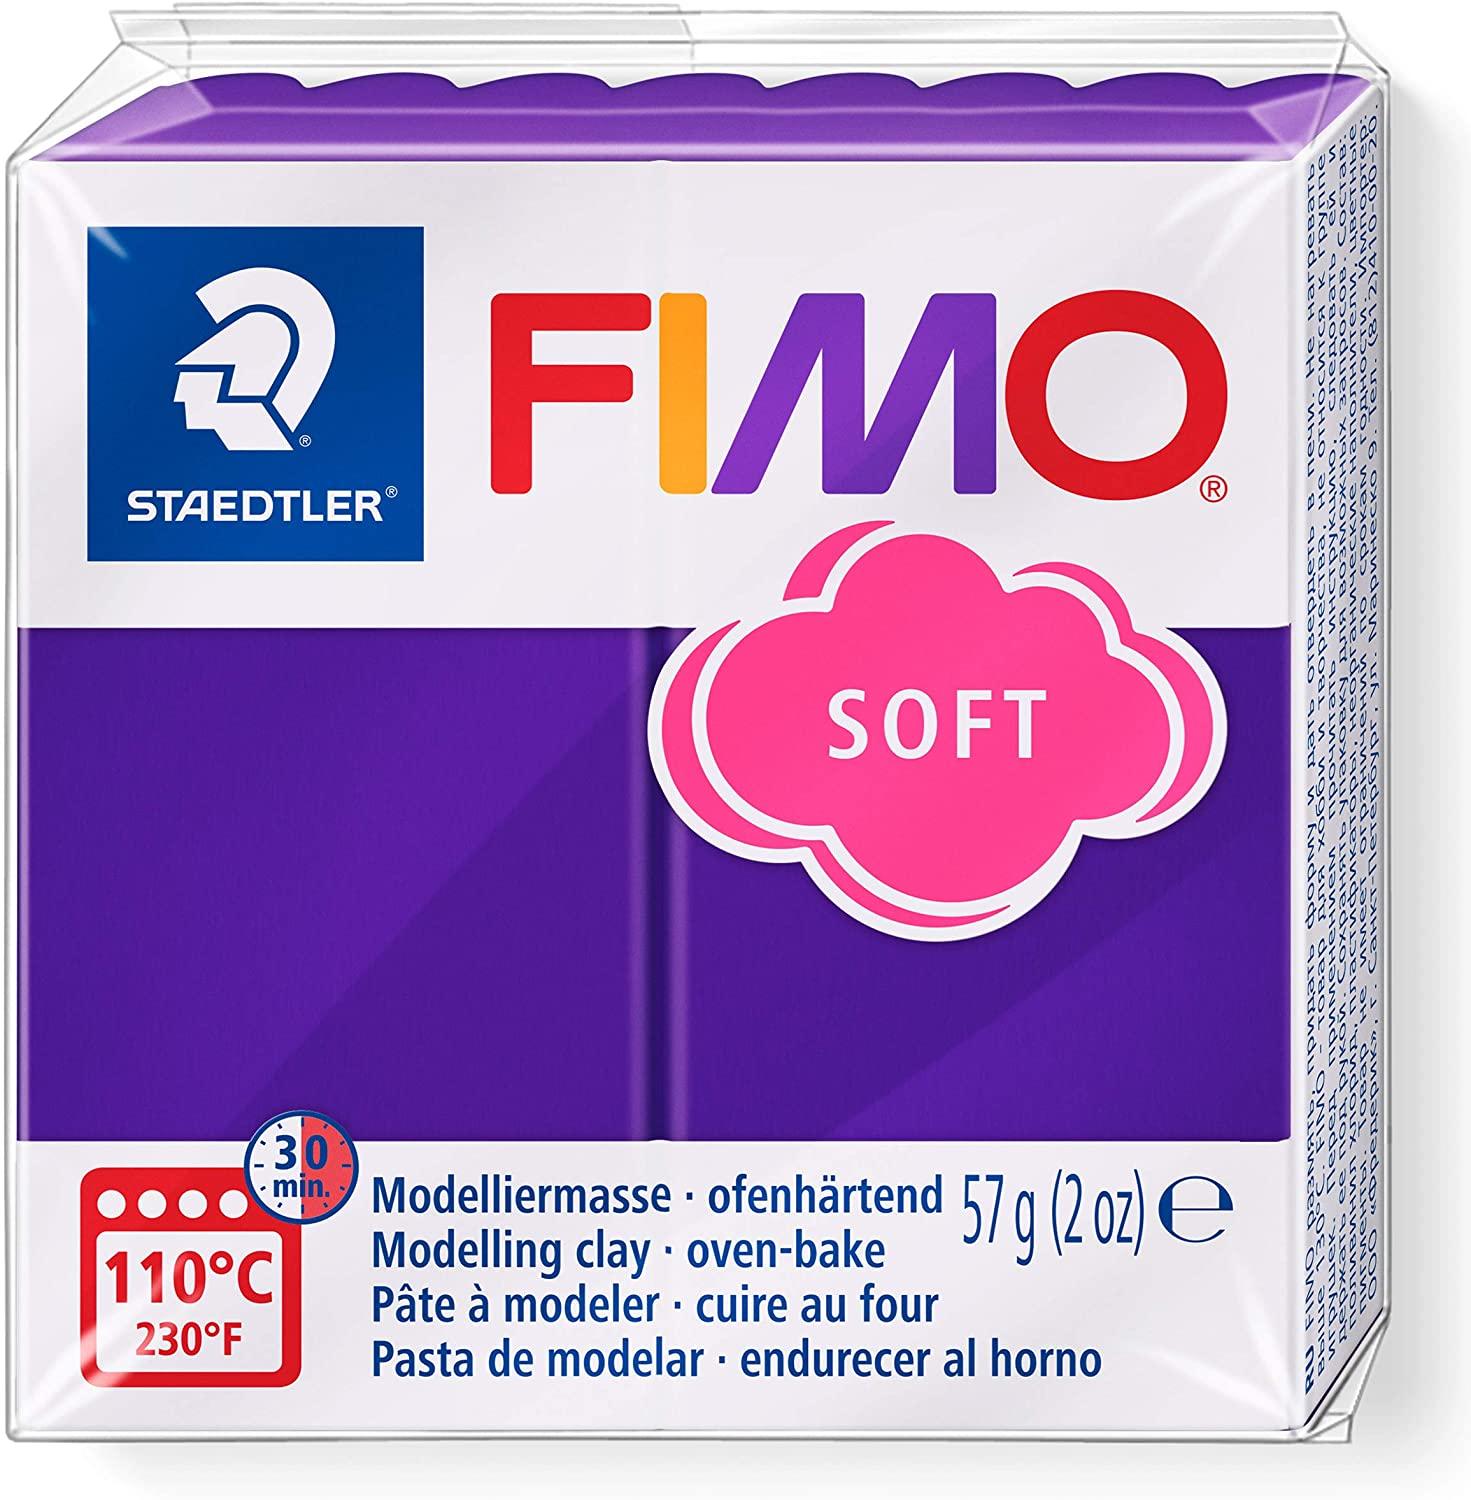 Purple block of soft modelling clay by Staedtler.